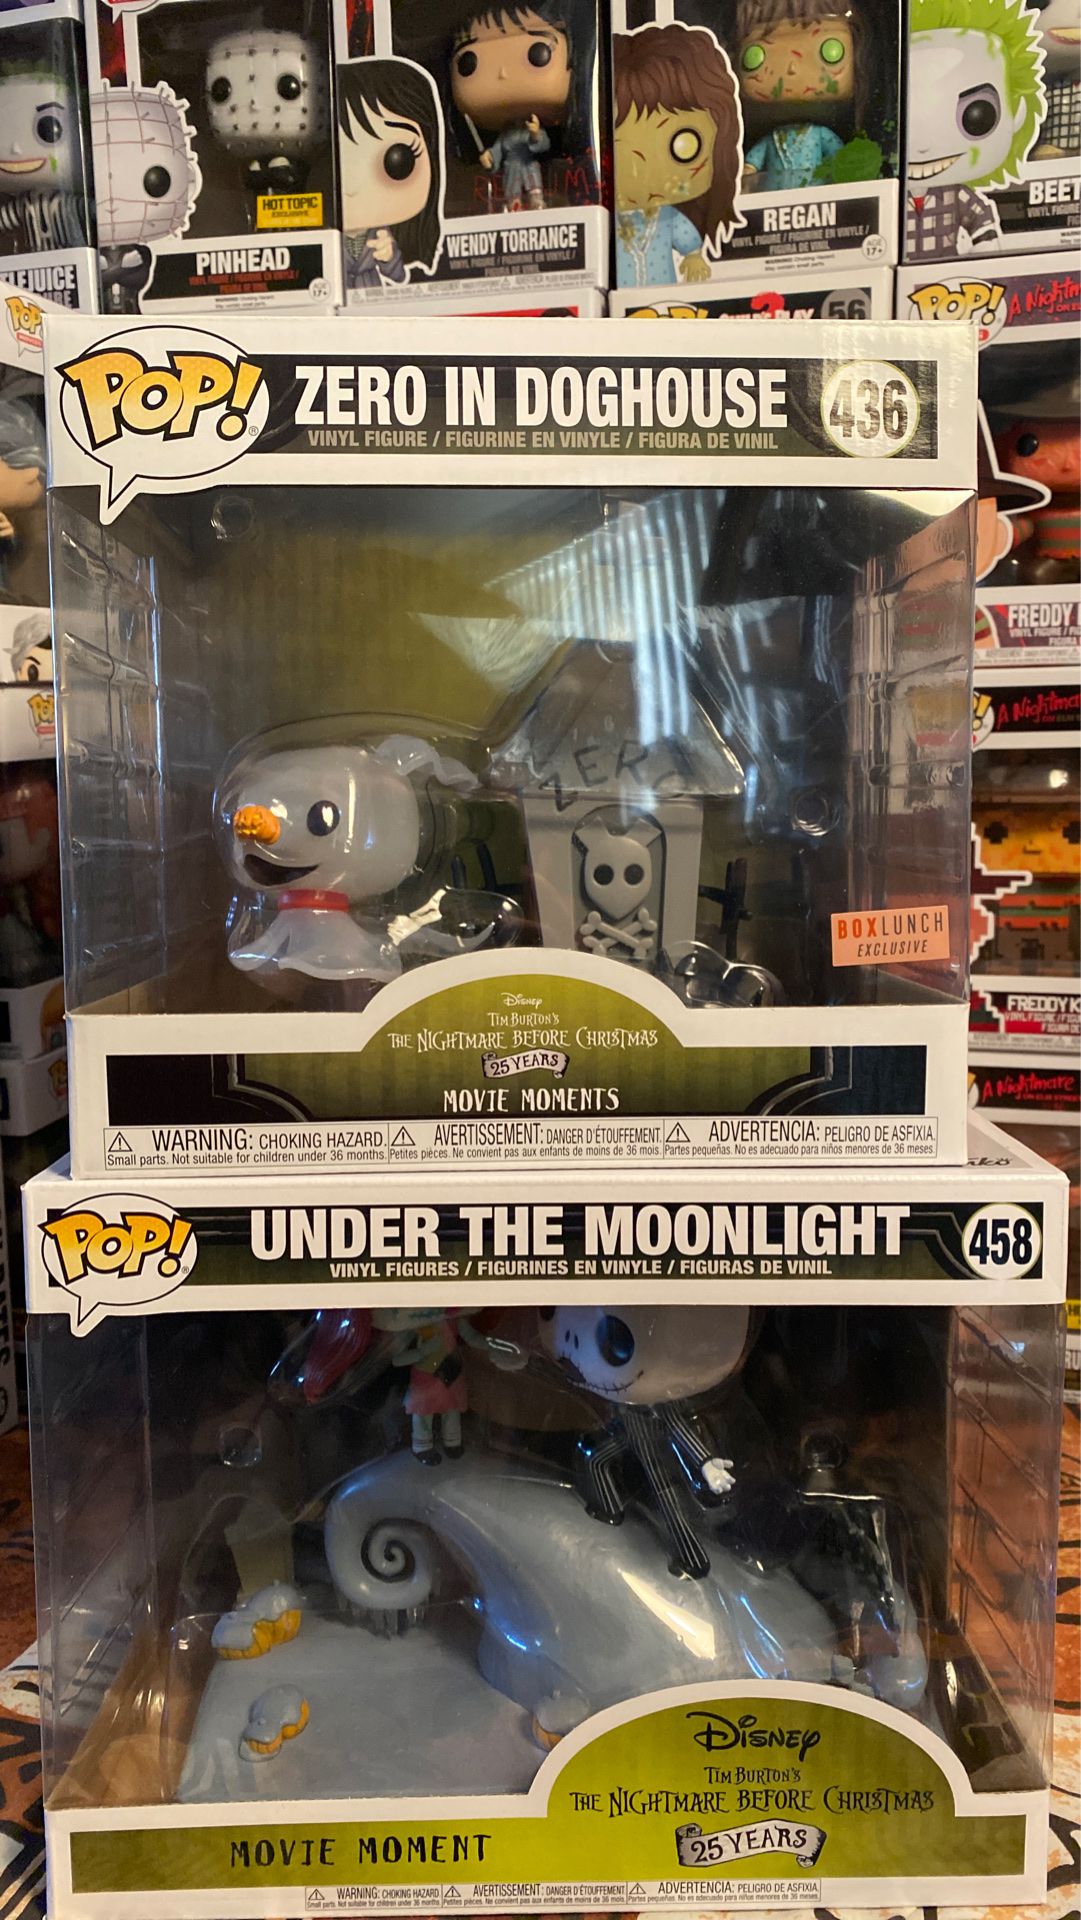 Nightmare Before Christmas movie moments by Funko